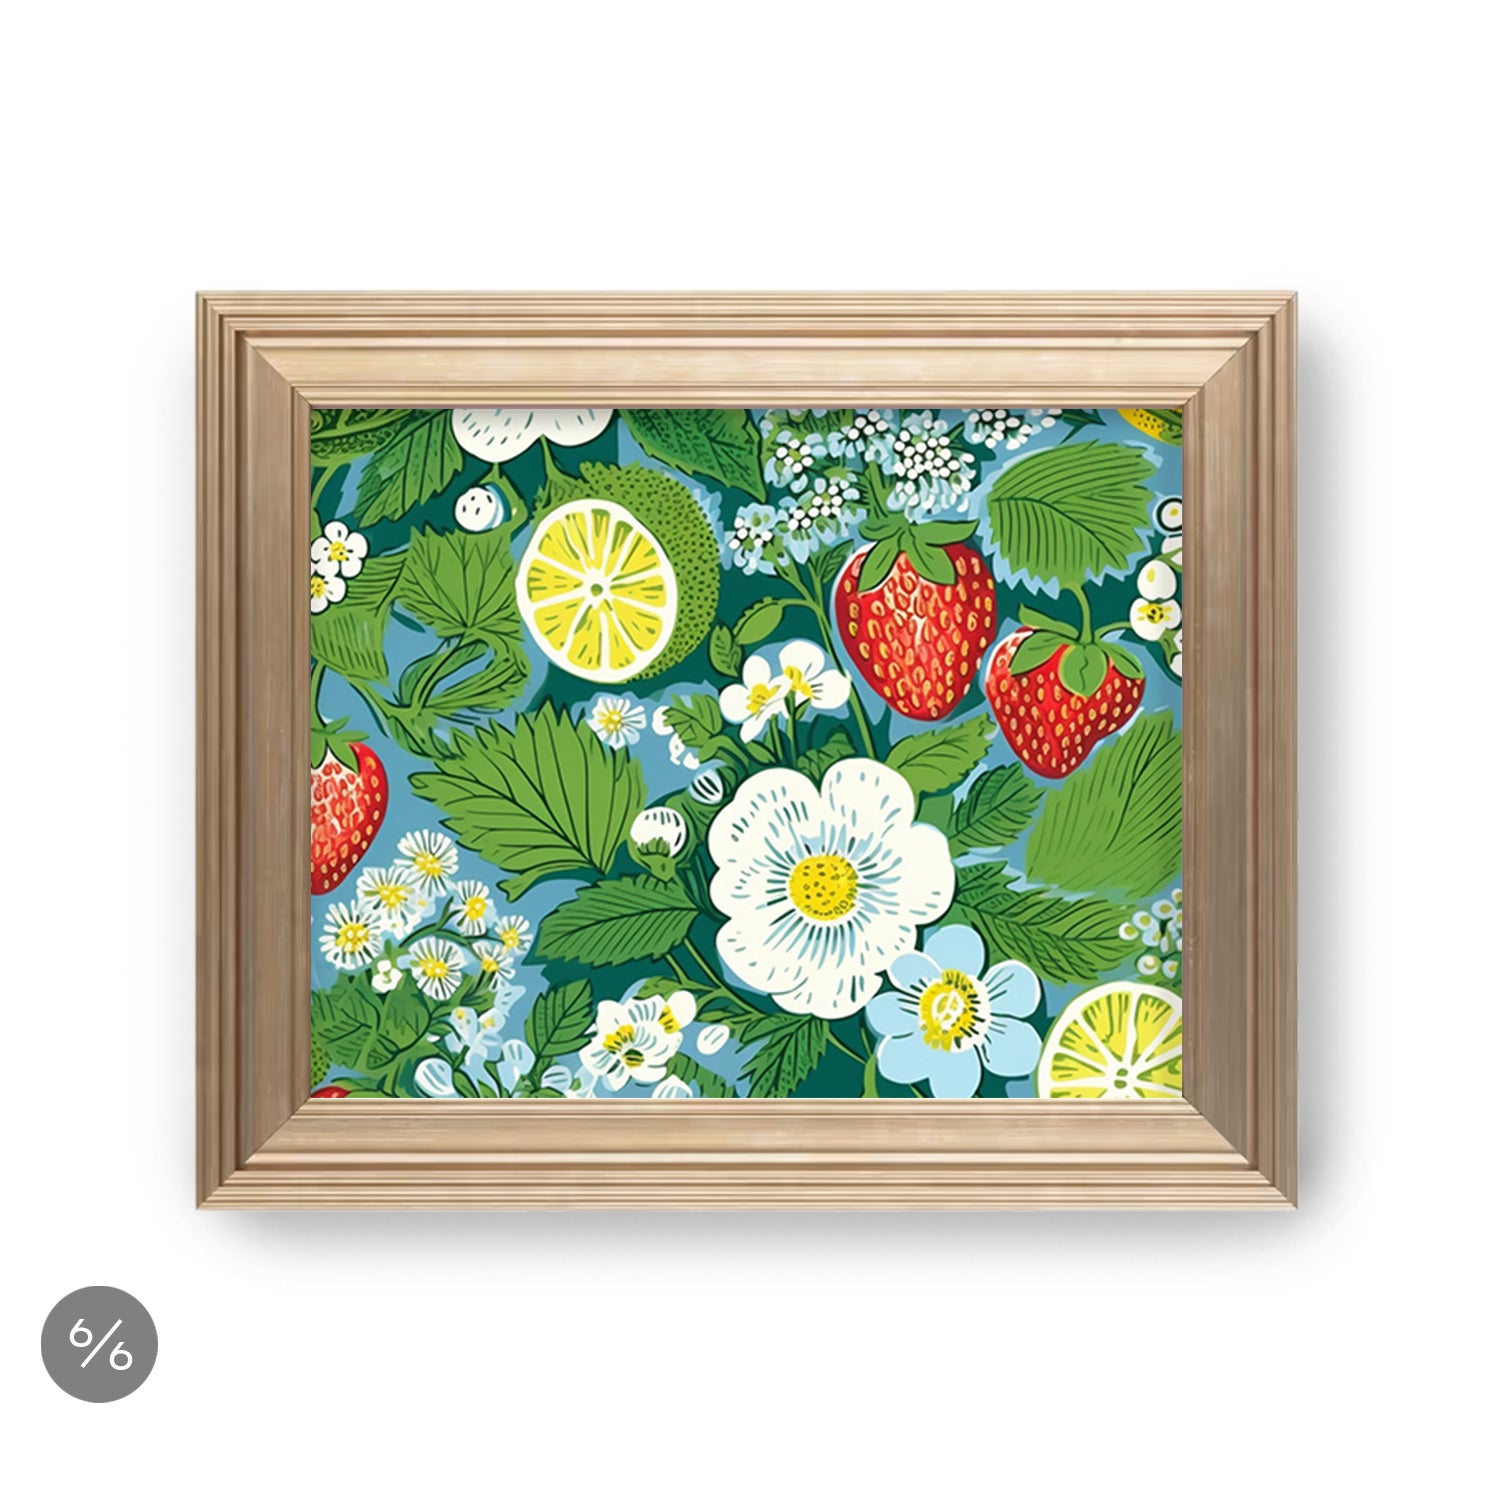 A vibrant art print featuring strawberries, lemons, and limes from the Gallery Wall | Sweet Tart | 6 Piece Set by Stannie & Lloyd, perfect for your gallery wall.